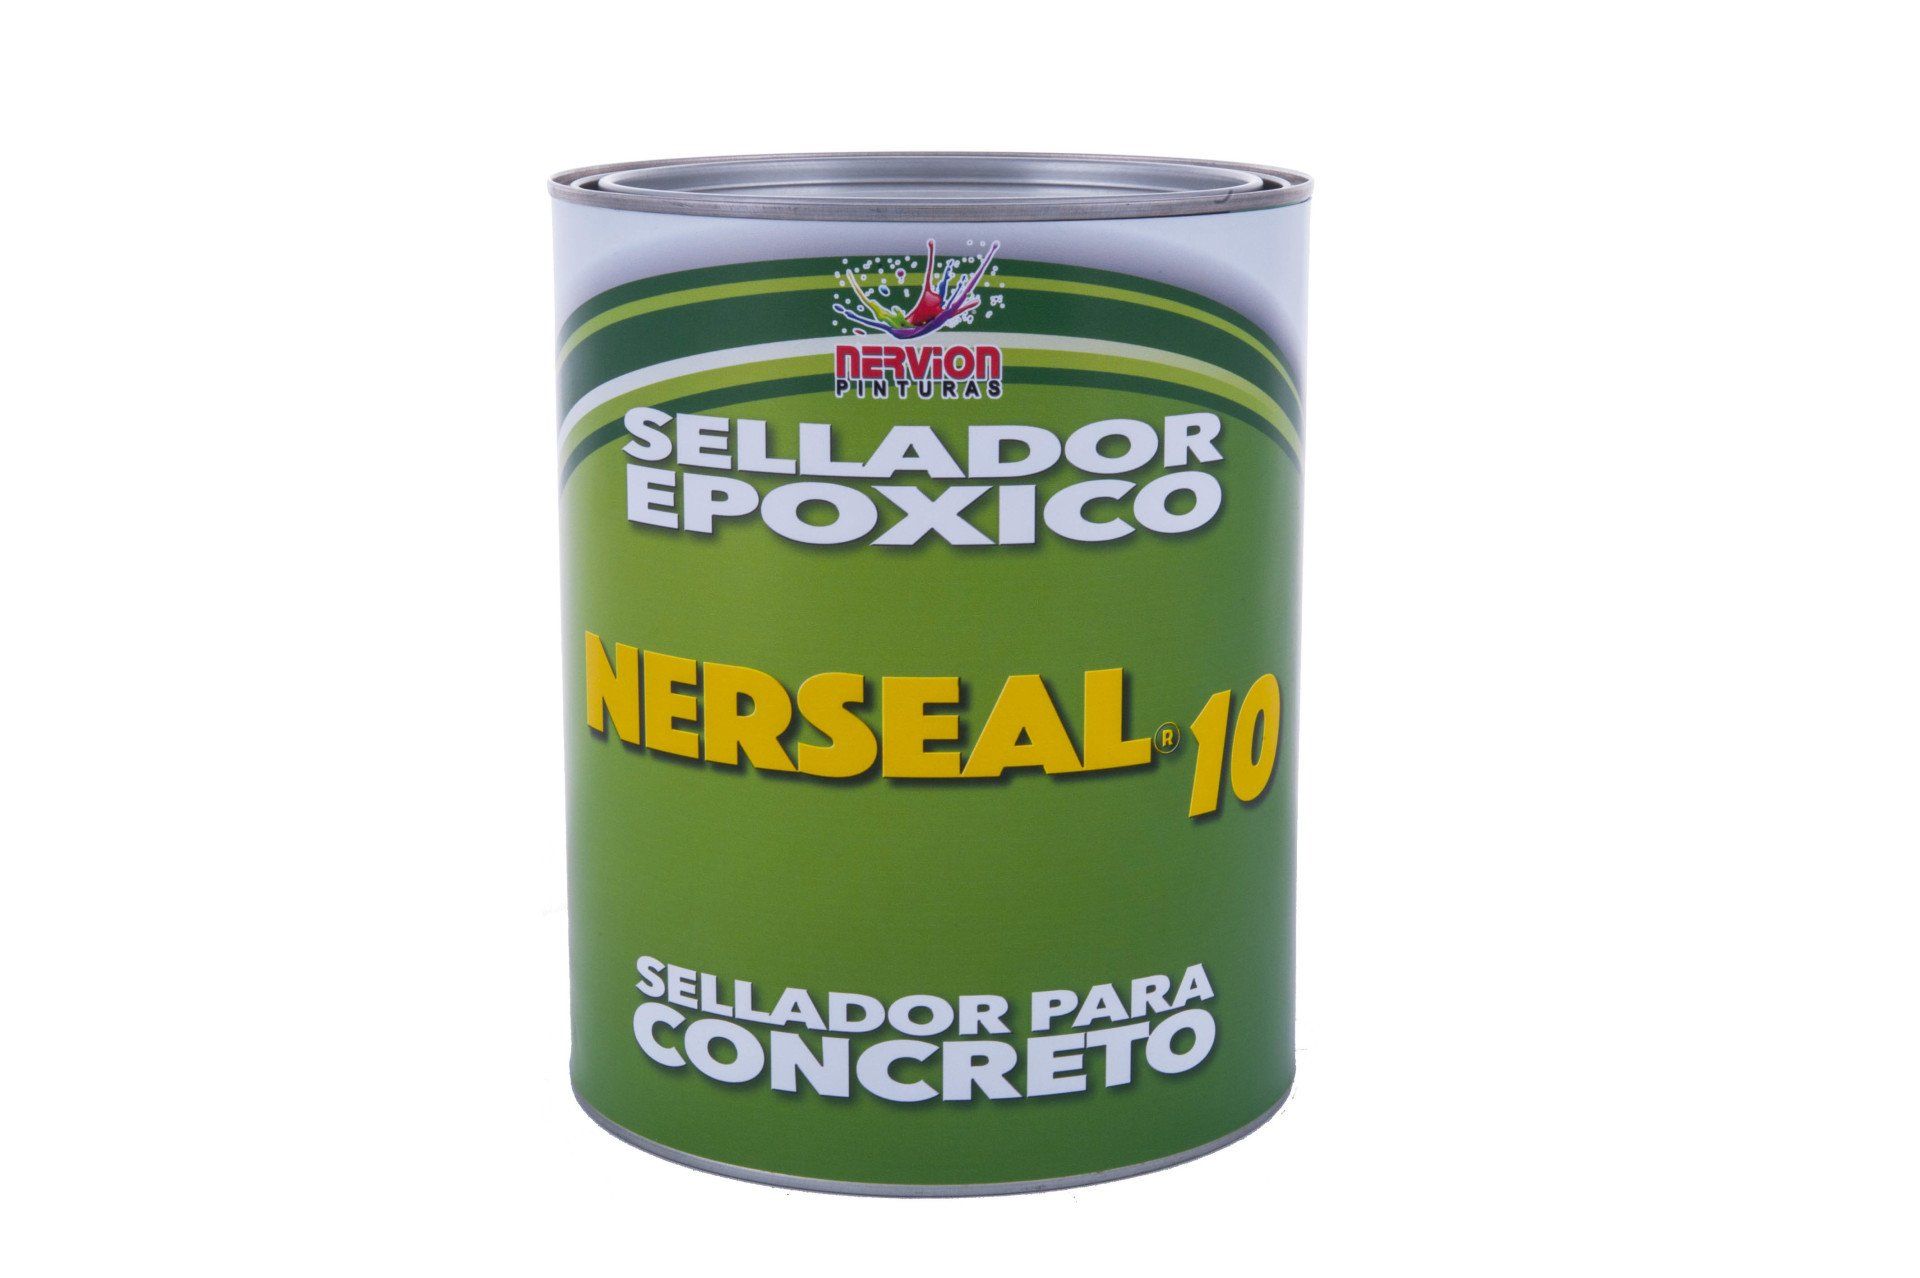 Nerseal® 10